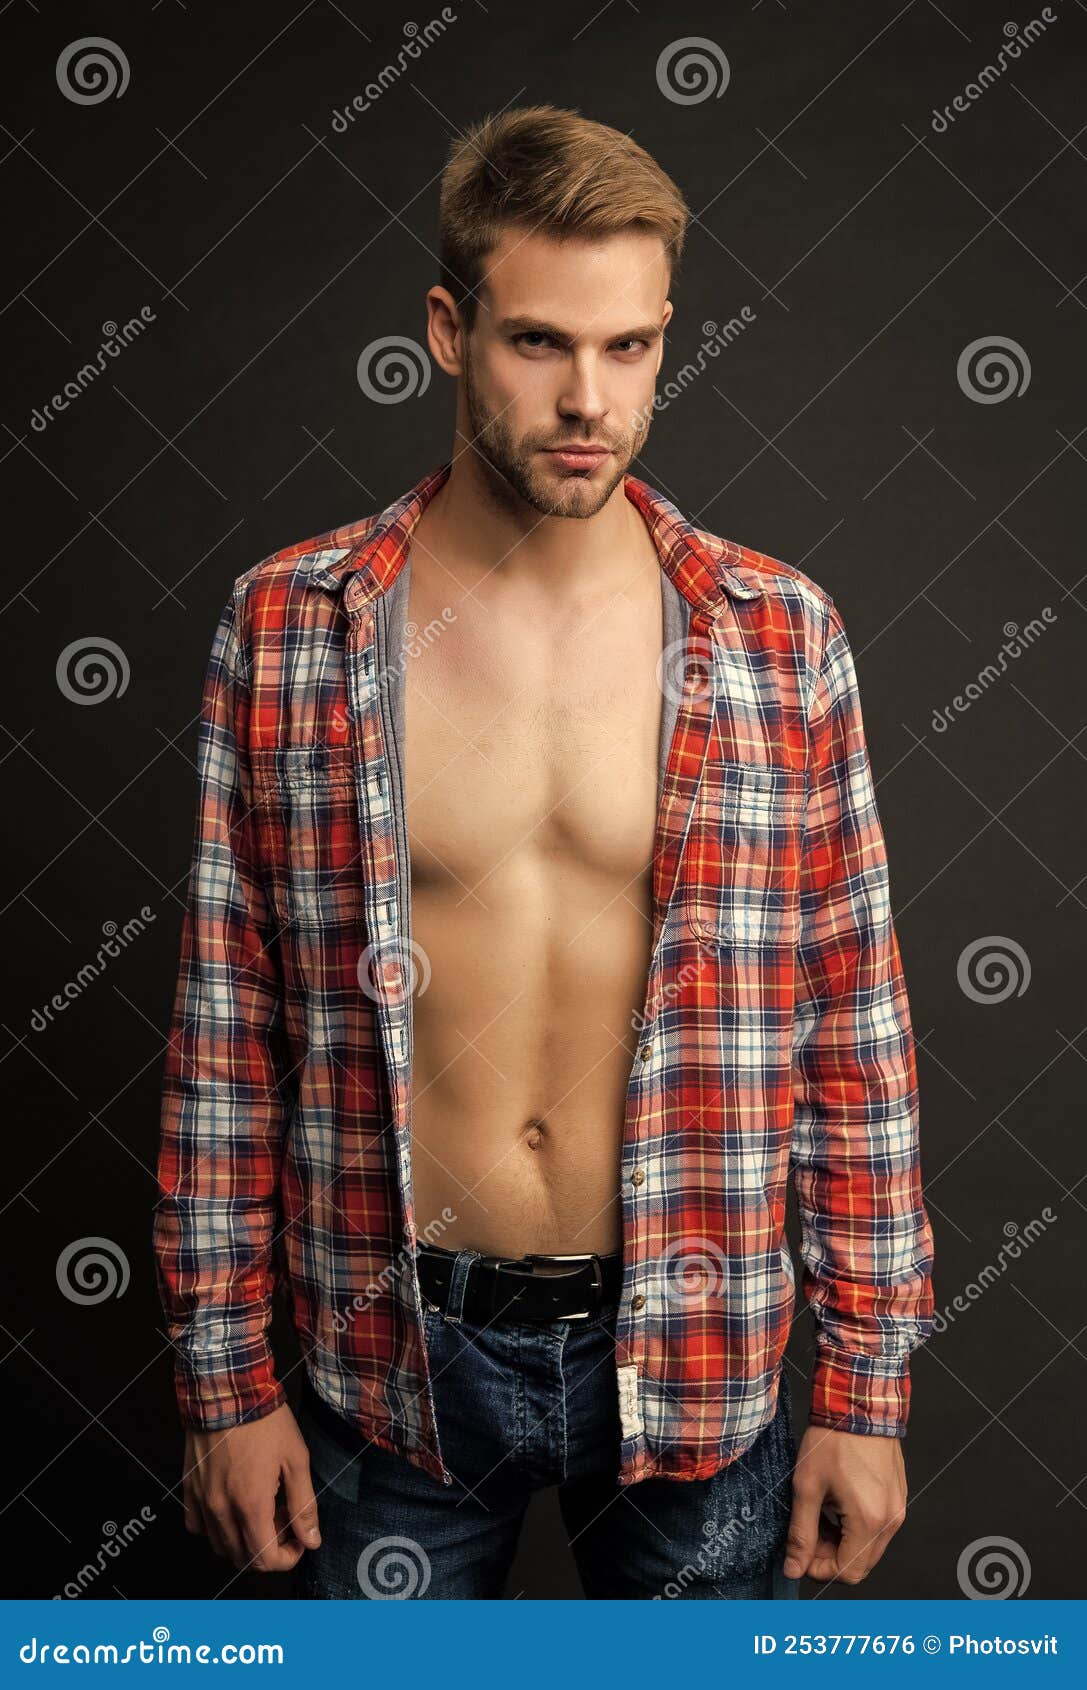 Serious Handsome Guy with Fit Torso Hairless Chest Posing in Open Plaid ...